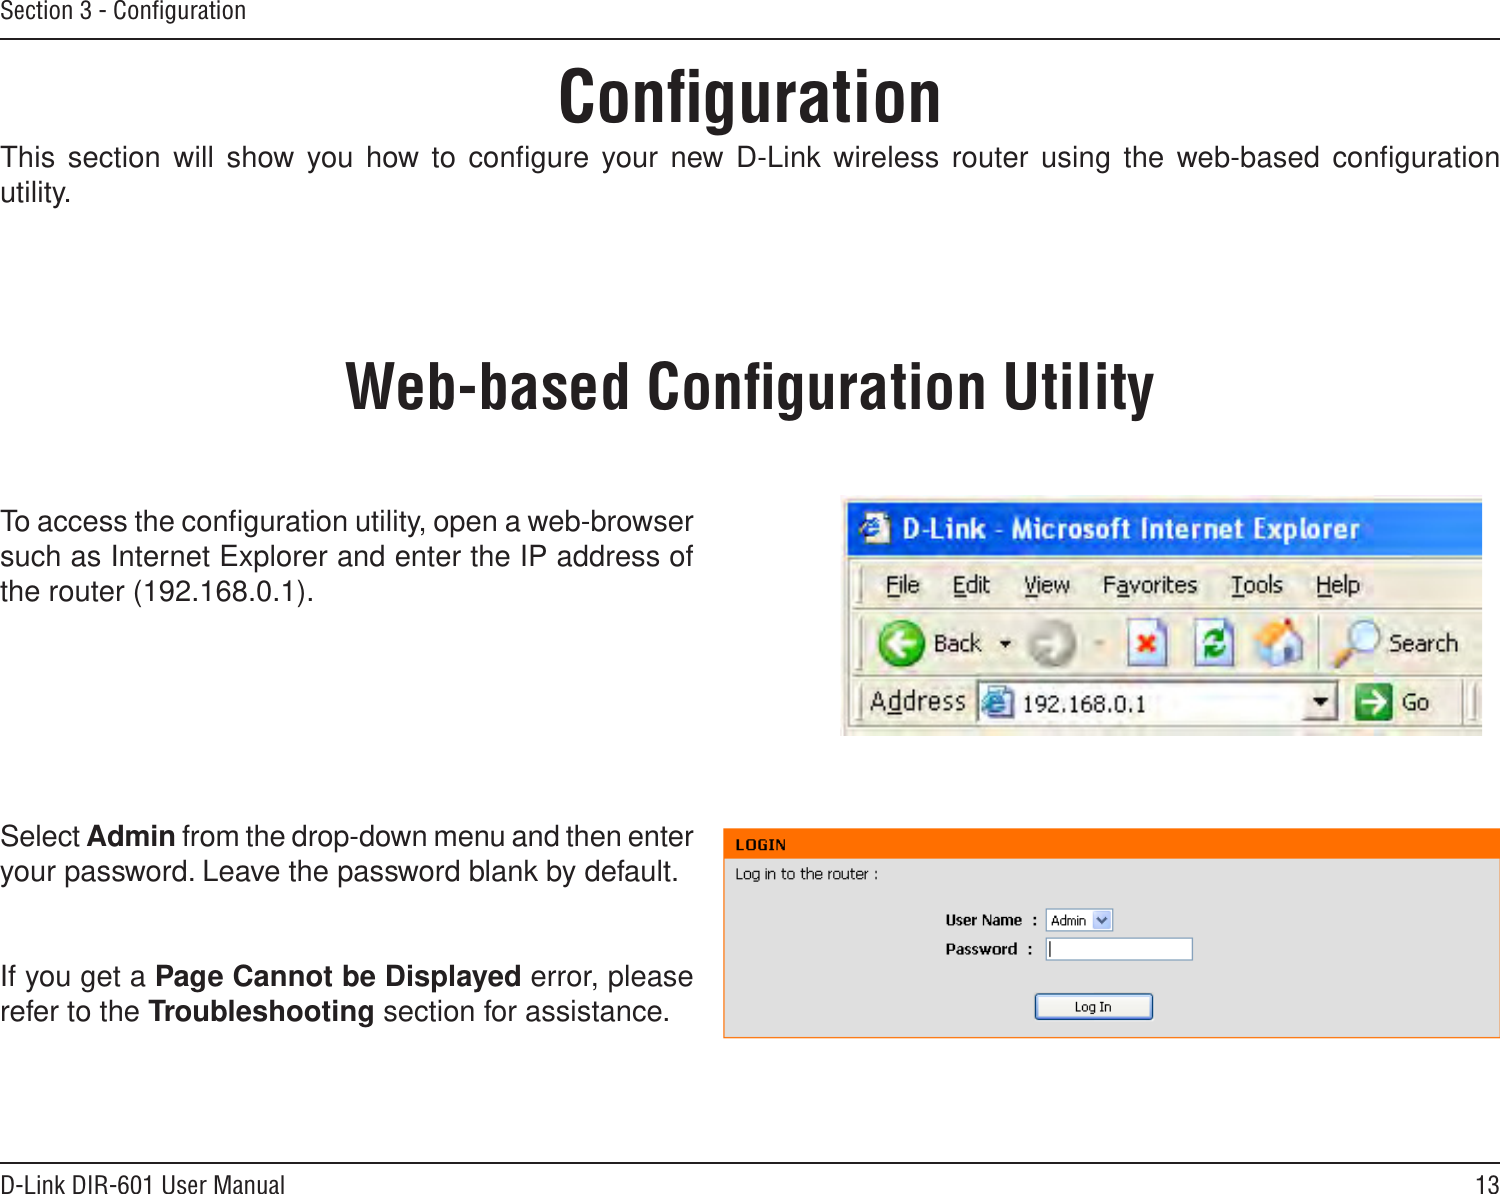 13D-Link DIR-601 User ManualSection 3 - ConﬁgurationConﬁgurationThis section will show you how to conﬁgure your new D-Link wireless router using the web-based conﬁguration utility.Web-based Conﬁguration UtilityTo access the conﬁguration utility, open a web-browser such as Internet Explorer and enter the IP address of the router (192.168.0.1).Select Admin from the drop-down menu and then enter your password. Leave the password blank by default.If you get a Page Cannot be Displayed error, please refer to the Troubleshooting section for assistance.